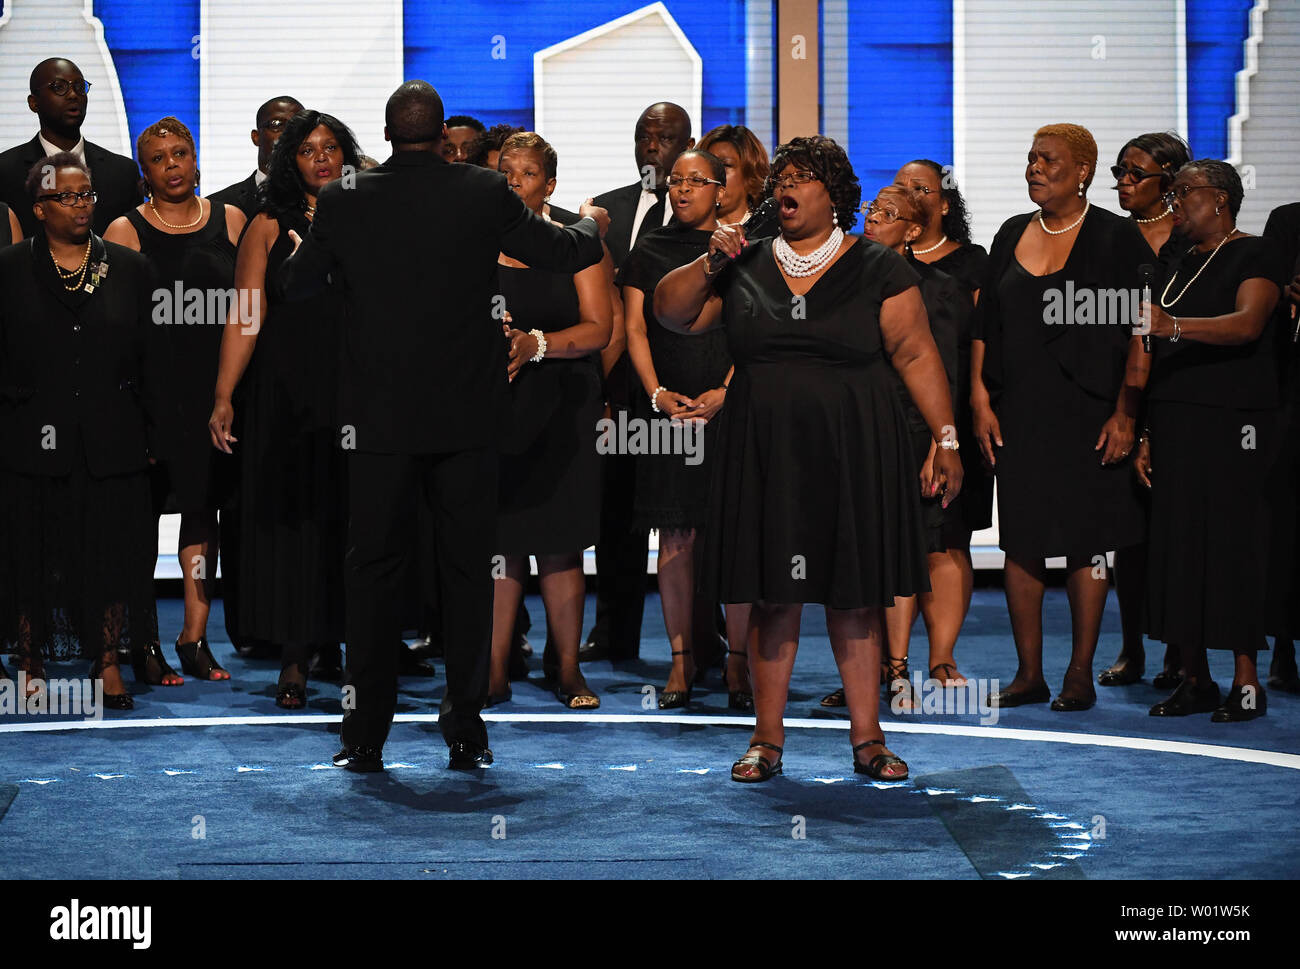 The Mother Emanuel AME Church Choir from Philadelphia performs the 'Battle Hymn of the Republic' on day one of the Democratic National Convention at the Wells Fargo Center in Philadelphia, Pennsylvania on Monday, July 25, 2016. The four-day convention starts on Monday, July 25th, and is expected to nominate Hillary Clinton for president of the United States. Photo by Pat Benic/UPI Stock Photo